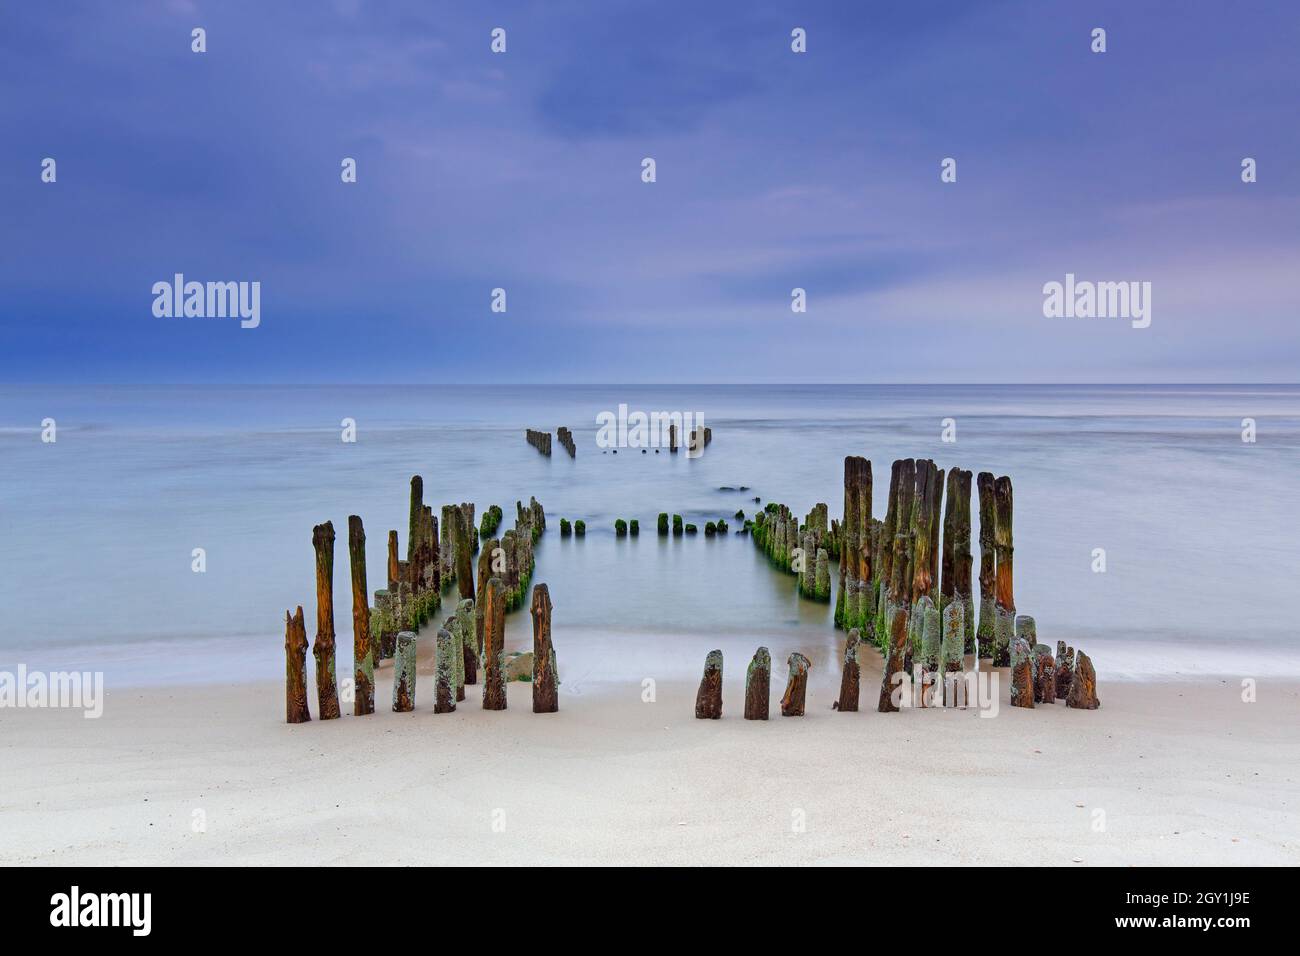 Remnant of old weathered wooden groyne / groin / breakwater on the beach of Rantum on the island Sylt, Nordfriesland, Schleswig-Holstein, Germany Stock Photo